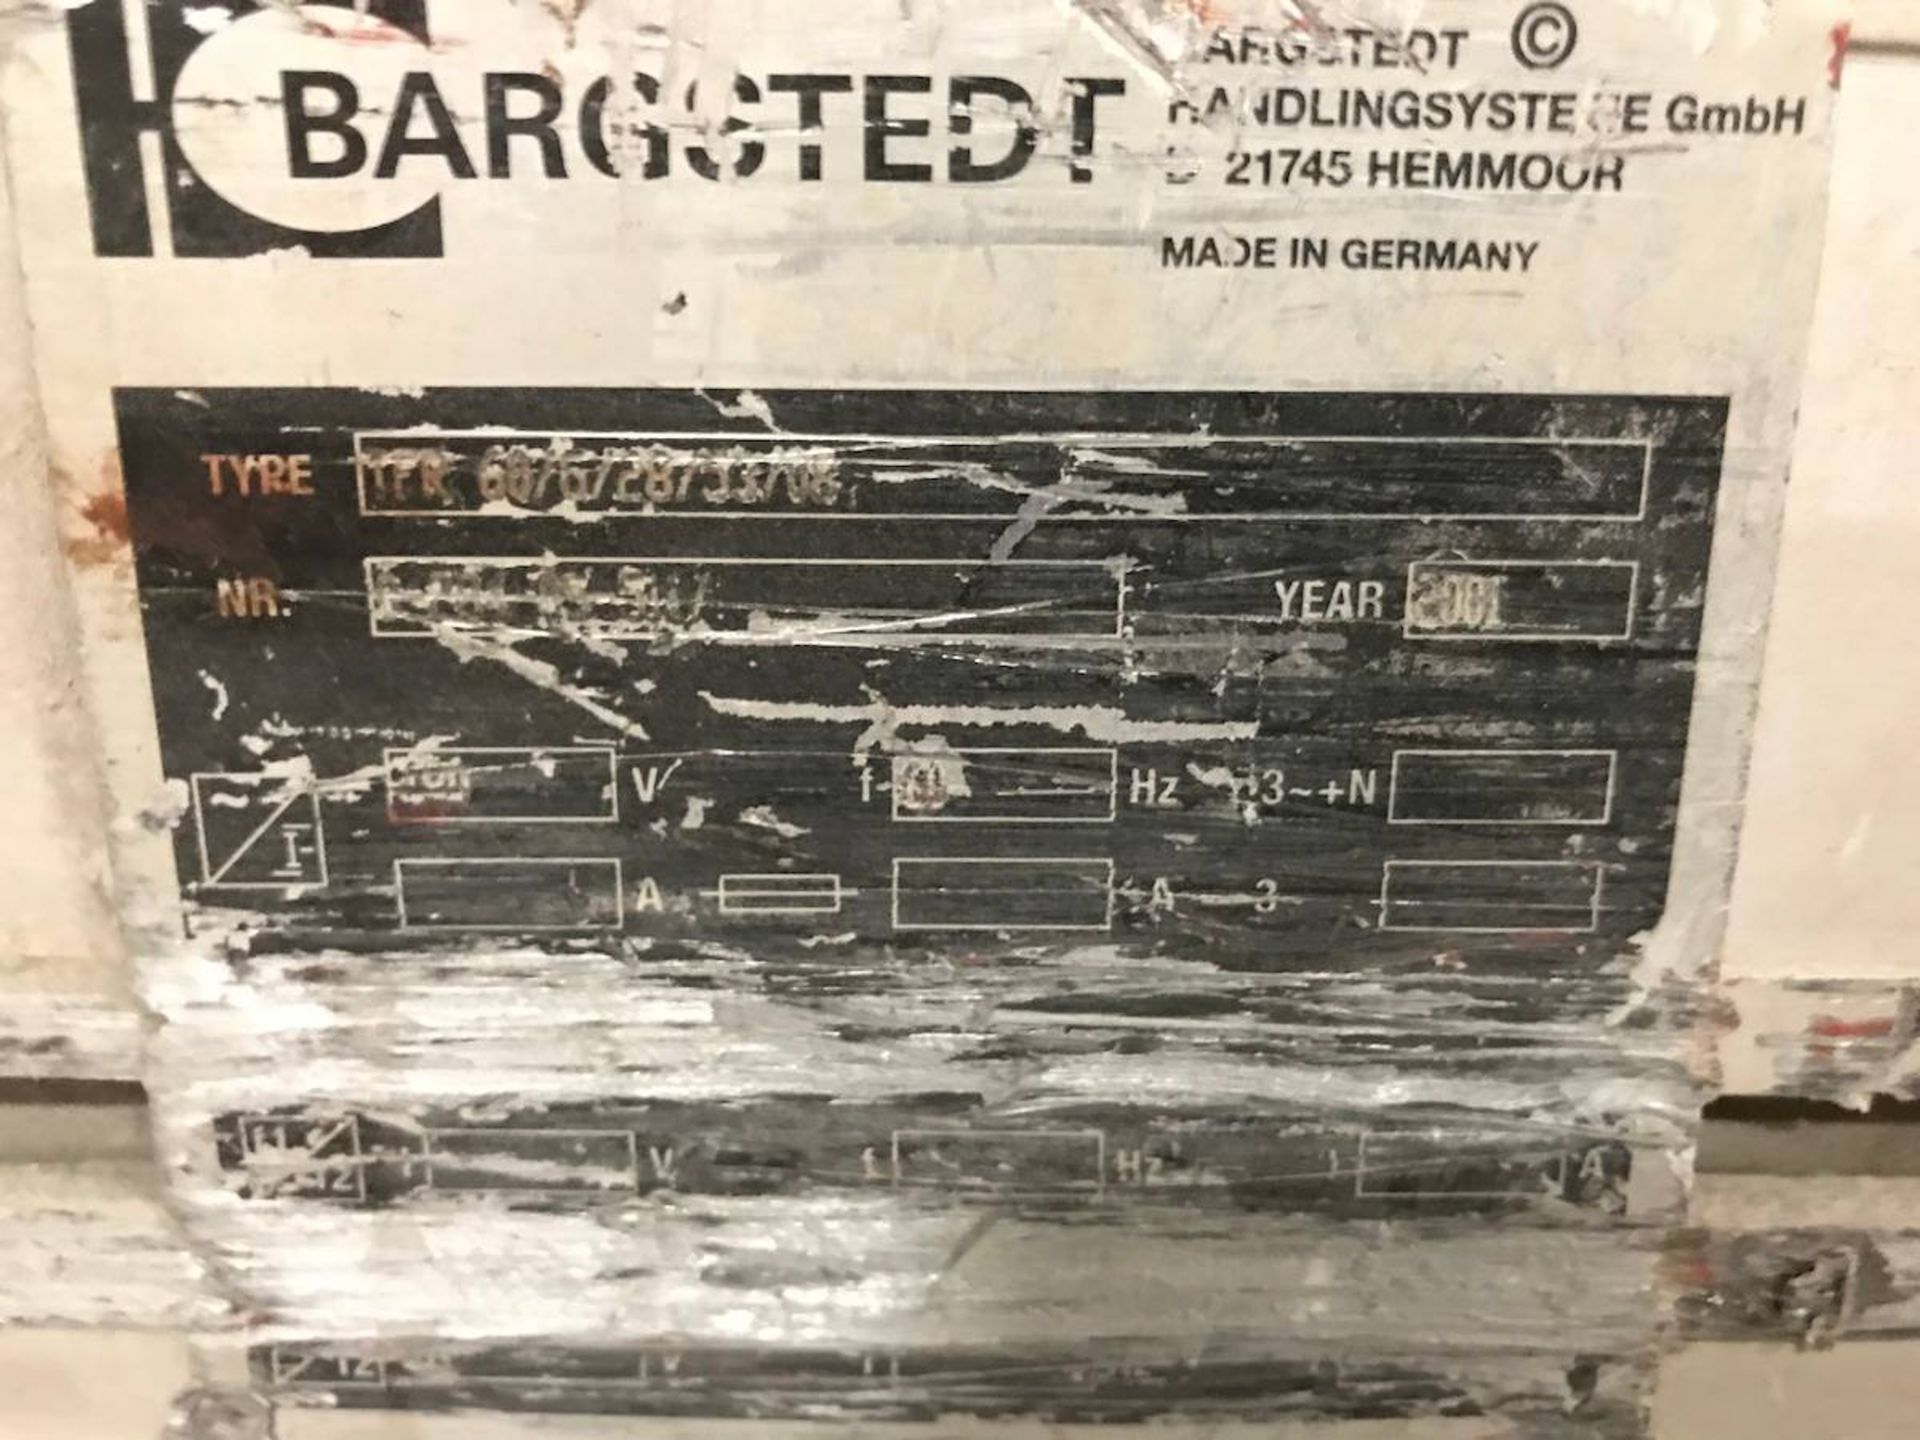 2001 Bargstedt Outfield Roll Case - Image 2 of 2